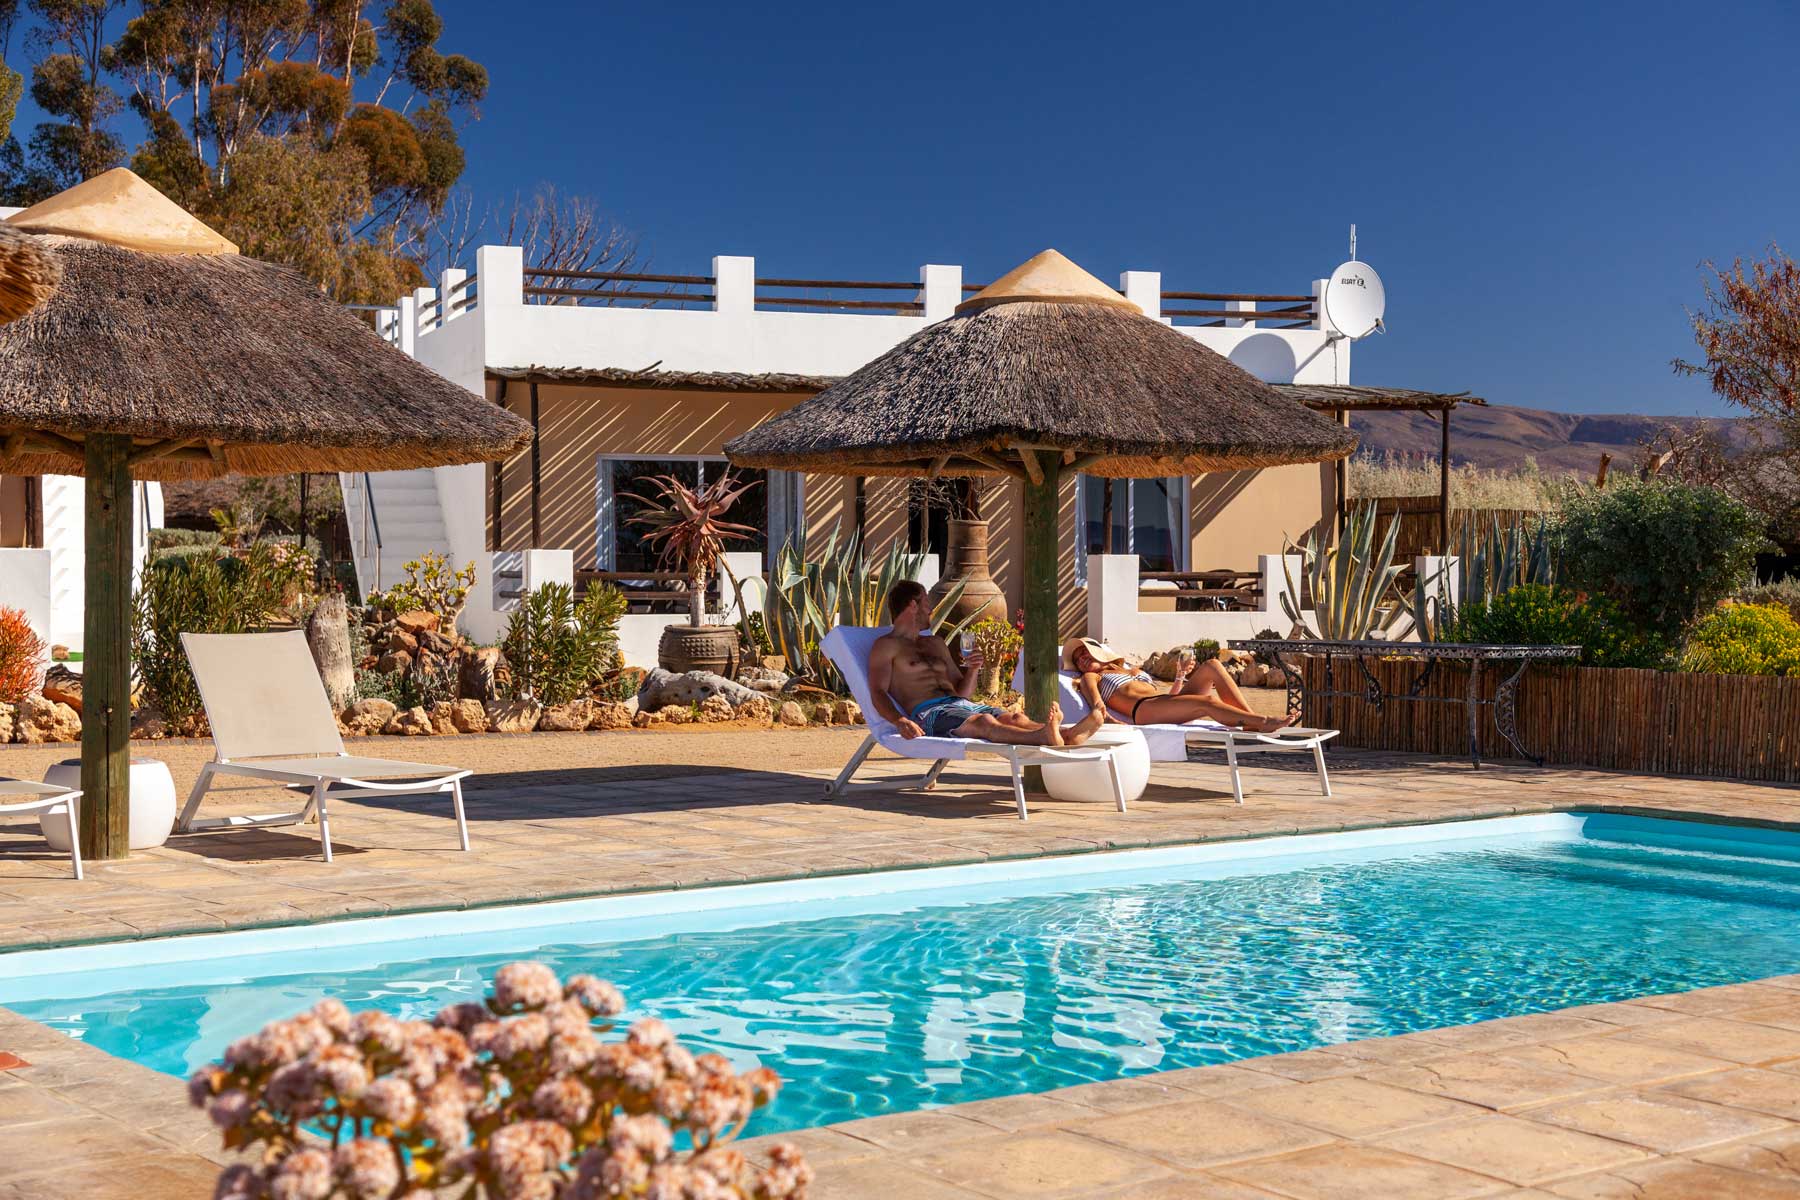 Ambassador chalet and private pool Accommodation available at Inverdoorn Private Game Reserve